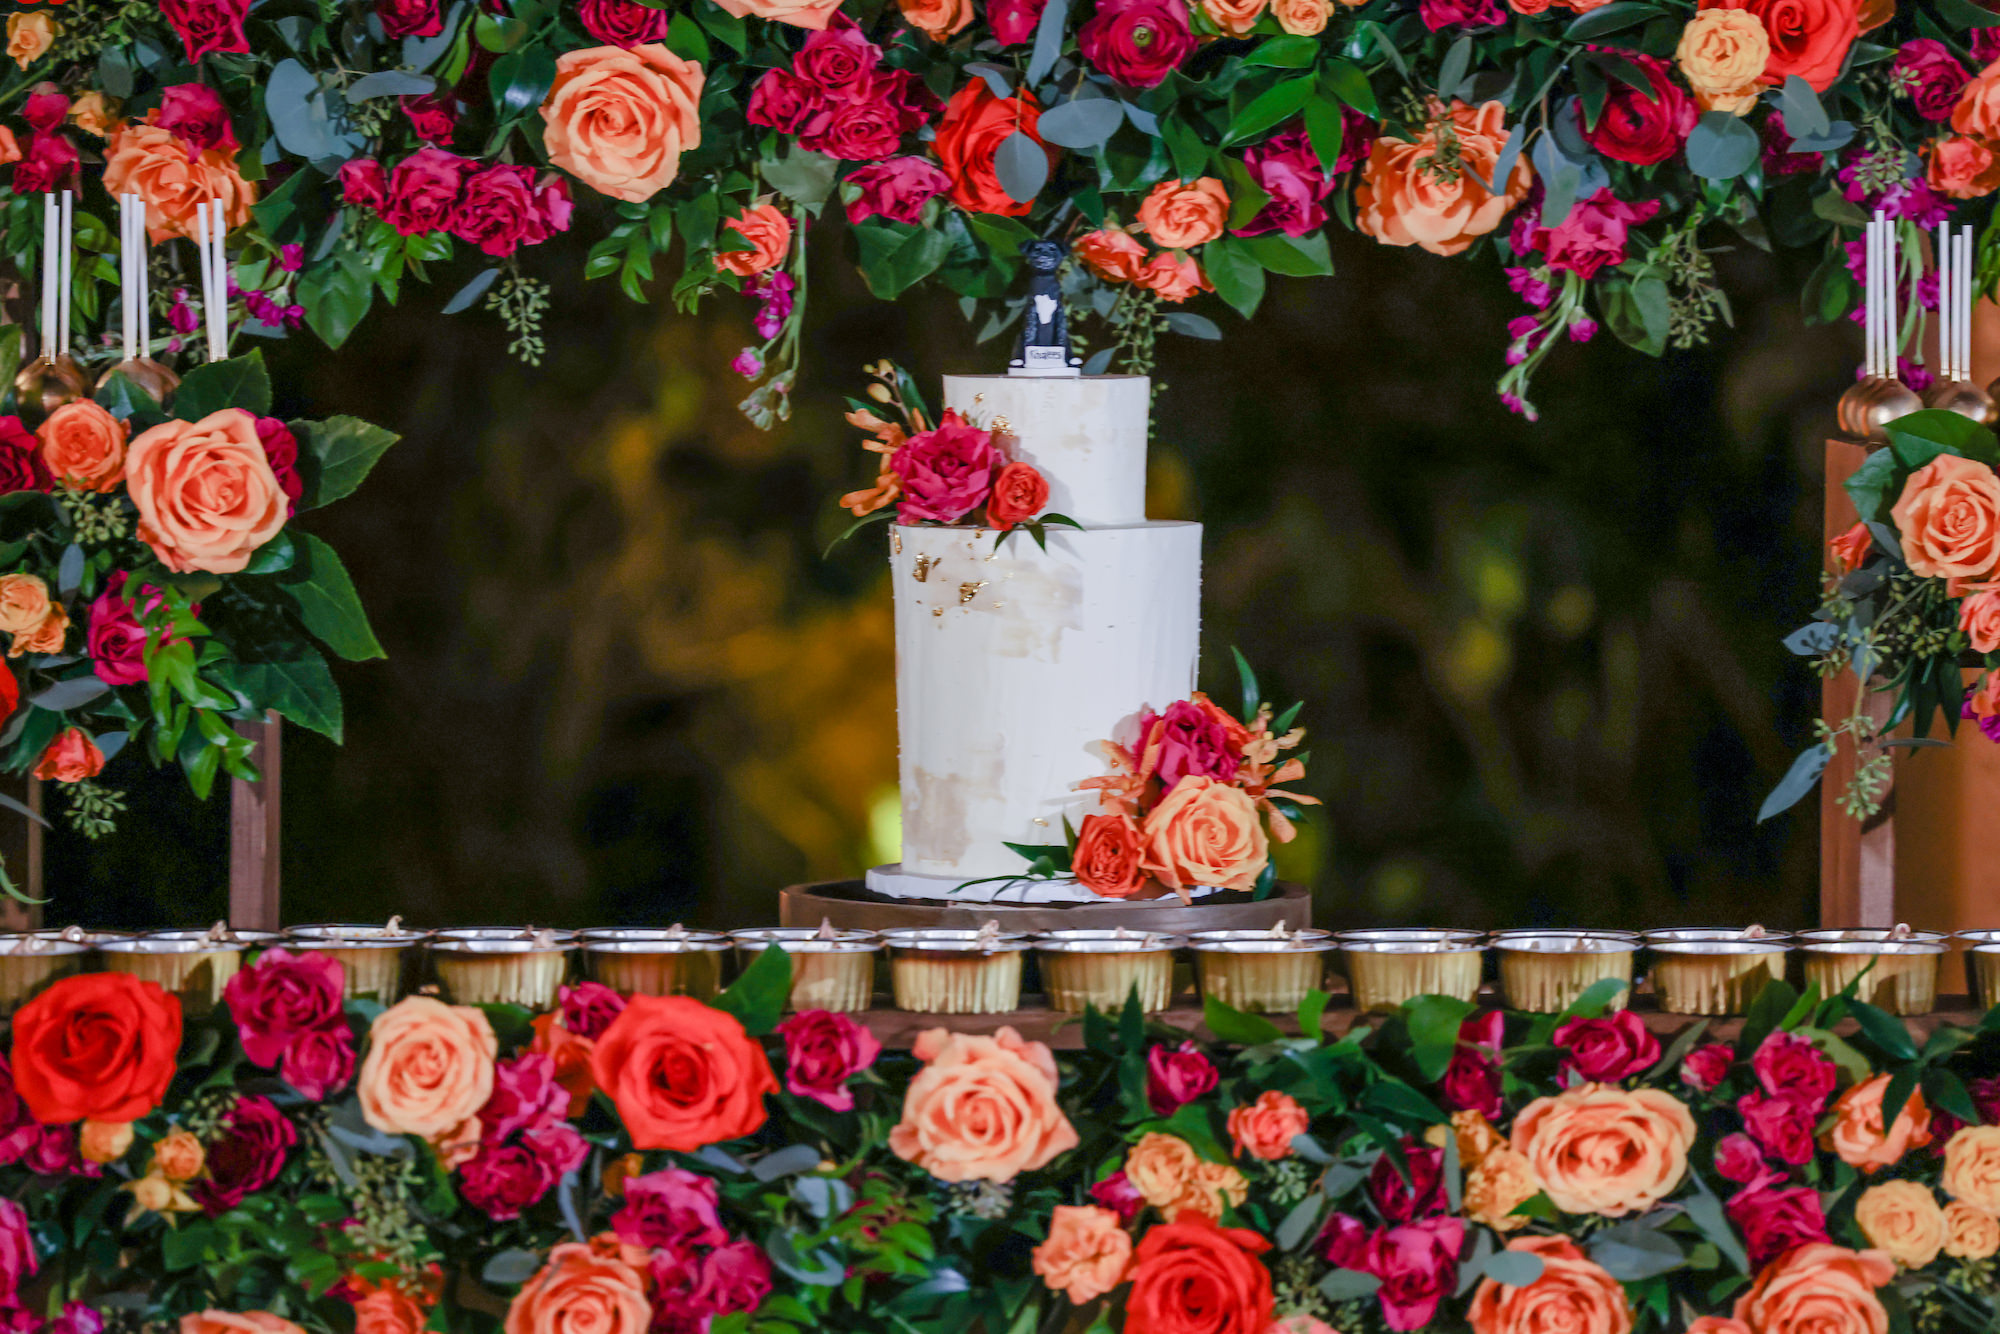 Two-Tiered Semi-Naked Wedding Cake | Tropical Maroon Carnations, Orange, Pink and Red Roses with Eucalyptus and Ruscus Greenery Dessert Table Floral Arrangement Inspiration | St. Pete Bakery The Artistic Whisk